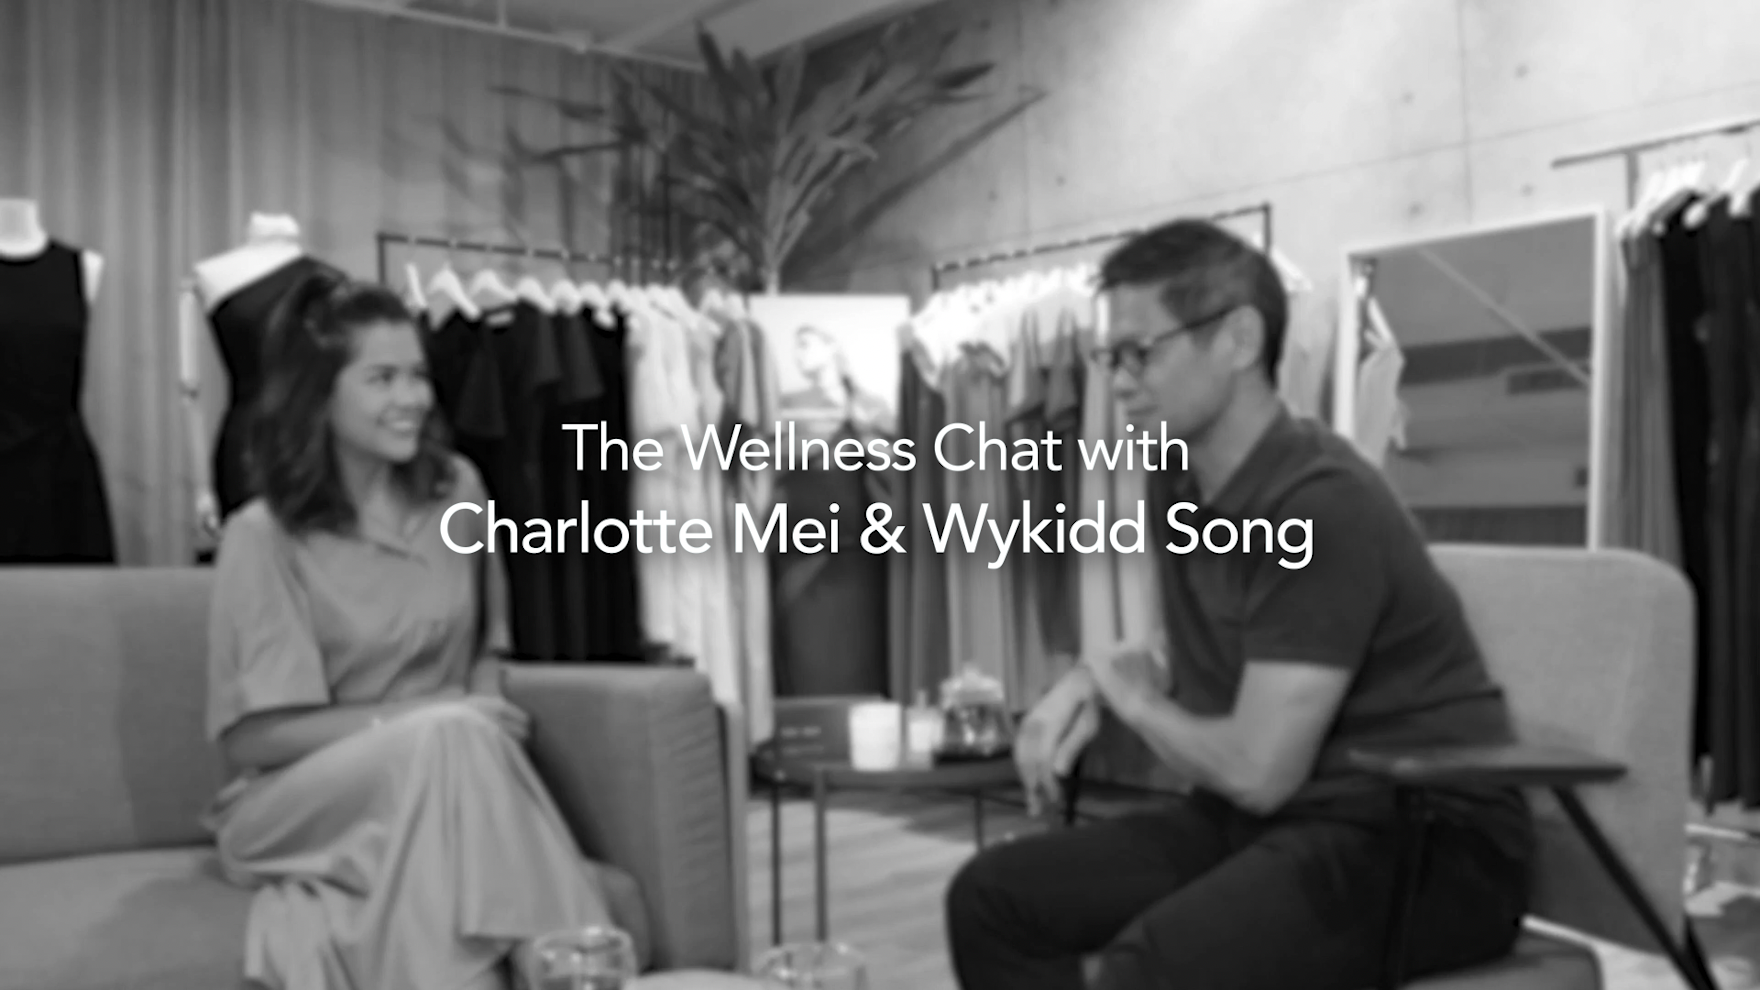 THE WELLNESS CHAT WITH CHARLOTTE MEI AND WYKIDD SONG